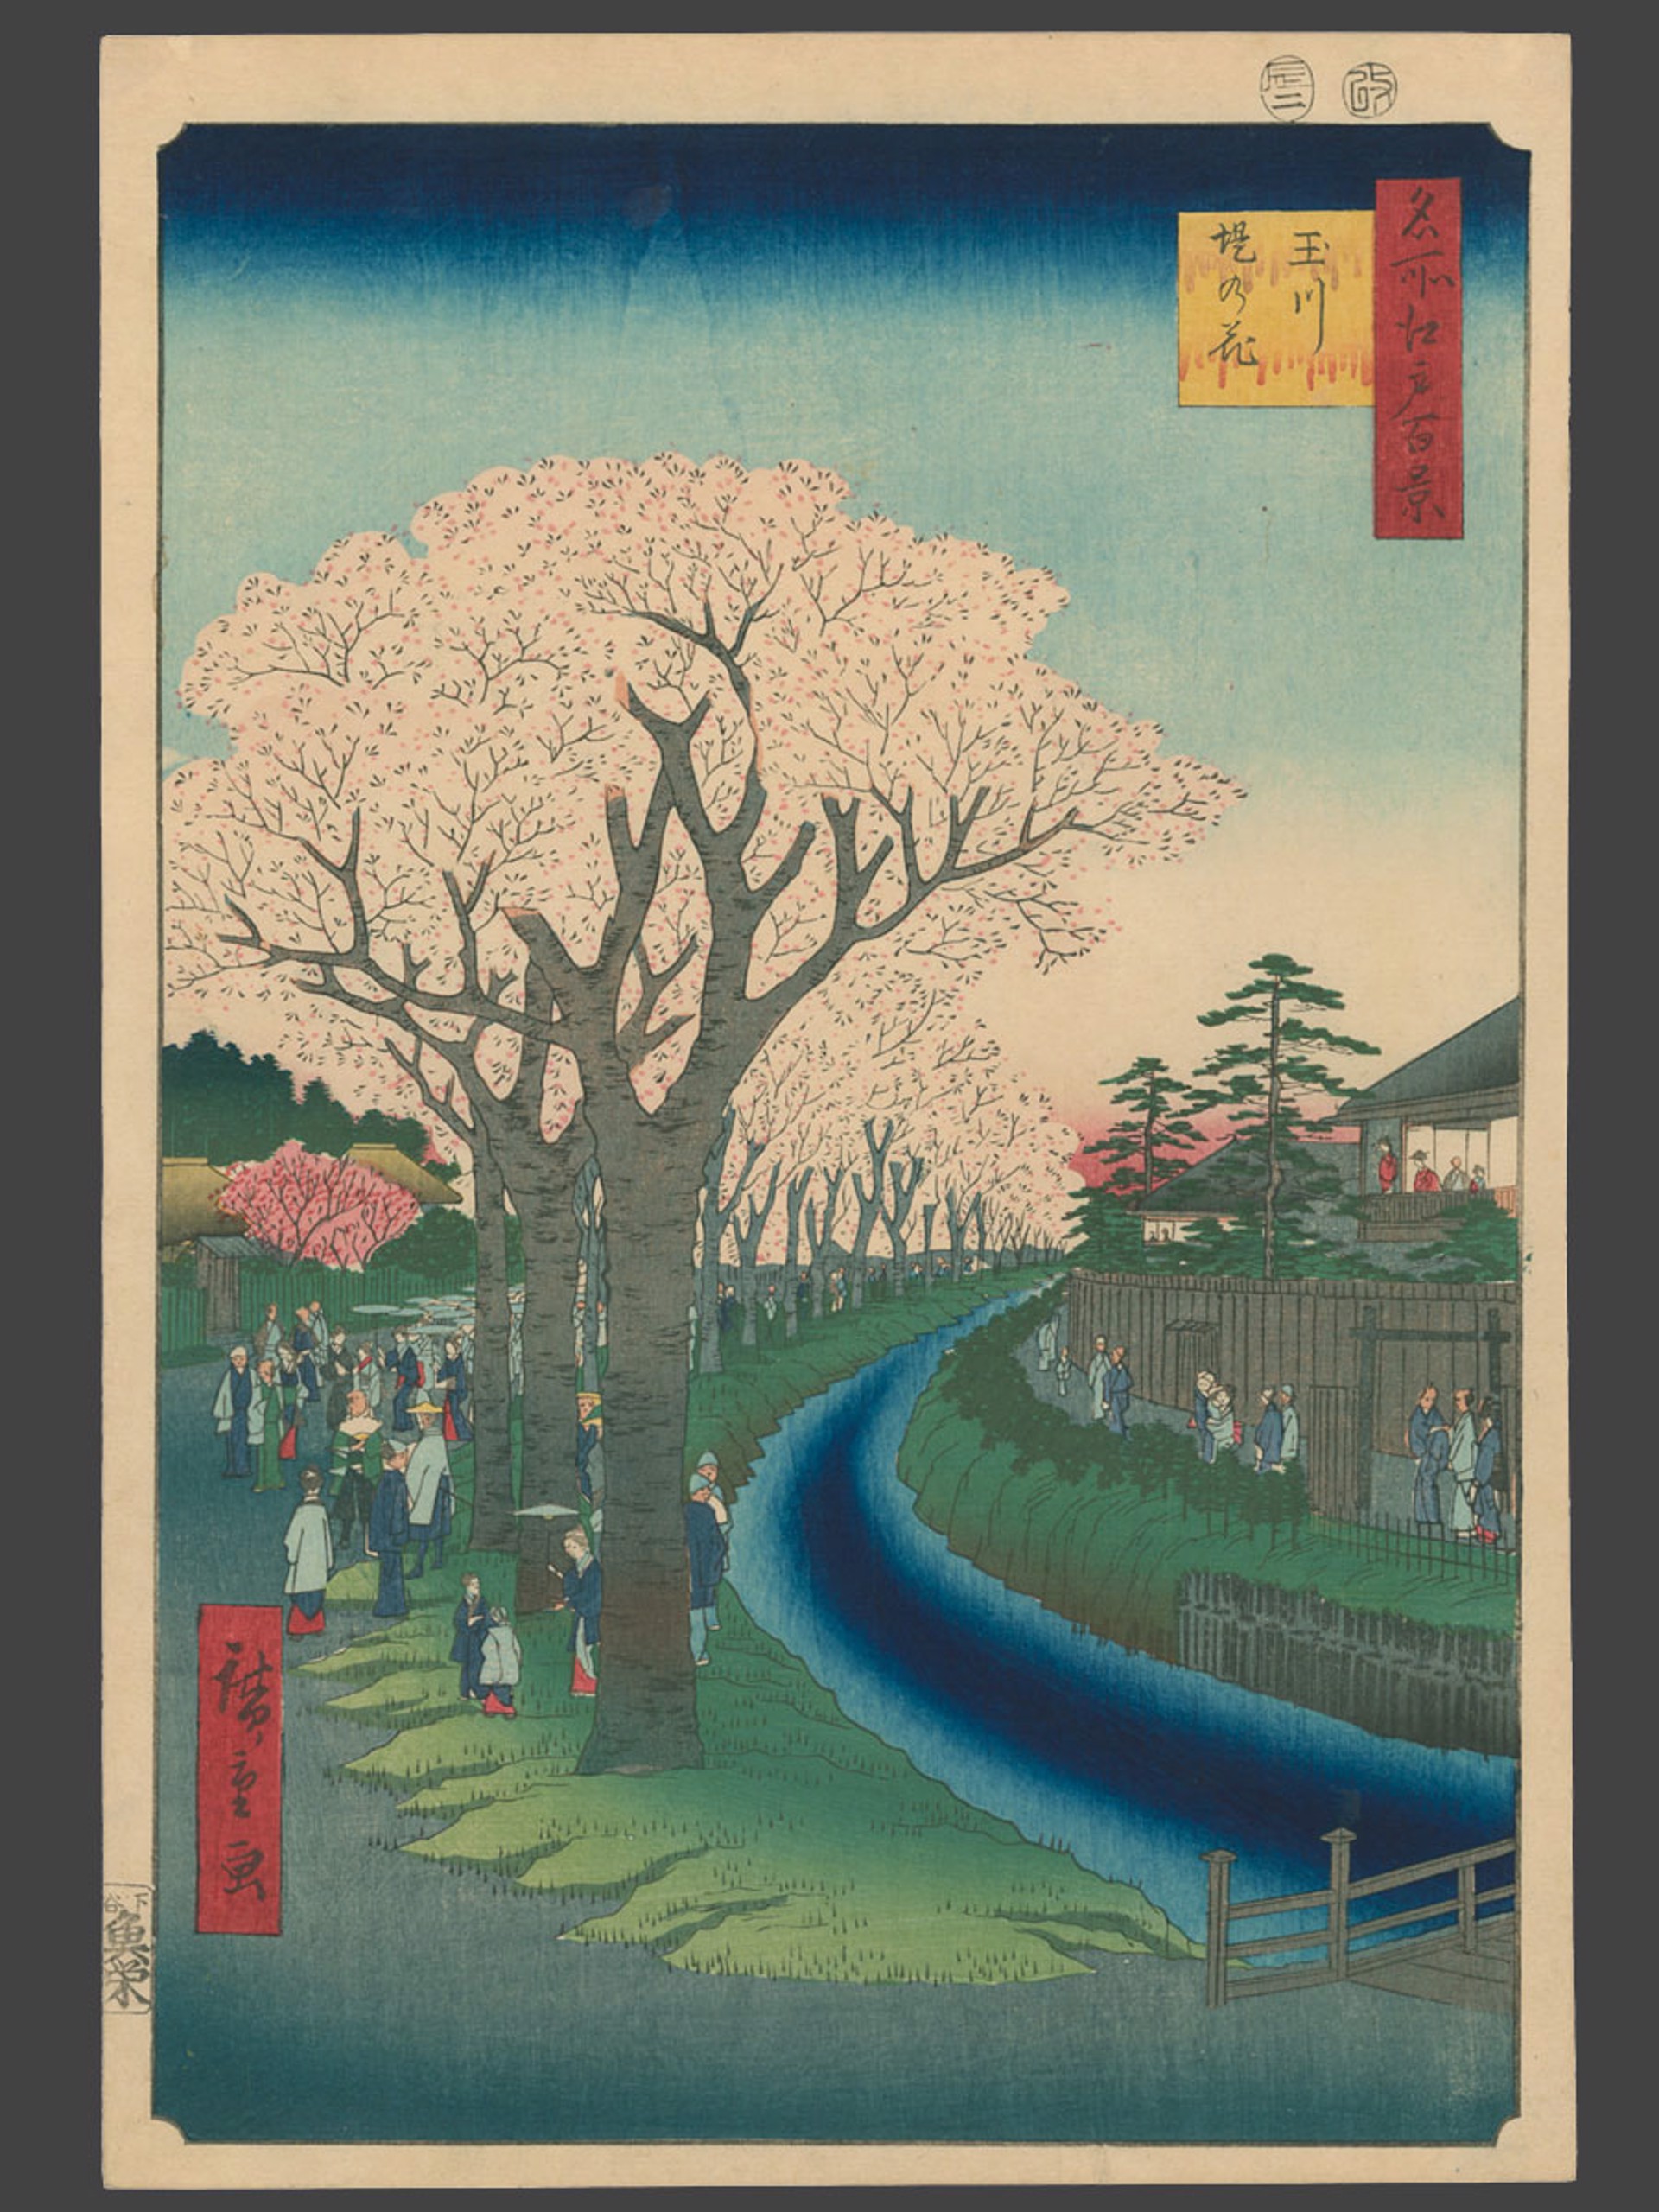 #42 - Cherry Blossoms on the Tama River Embankment 100 Views of Edo by Hiroshige